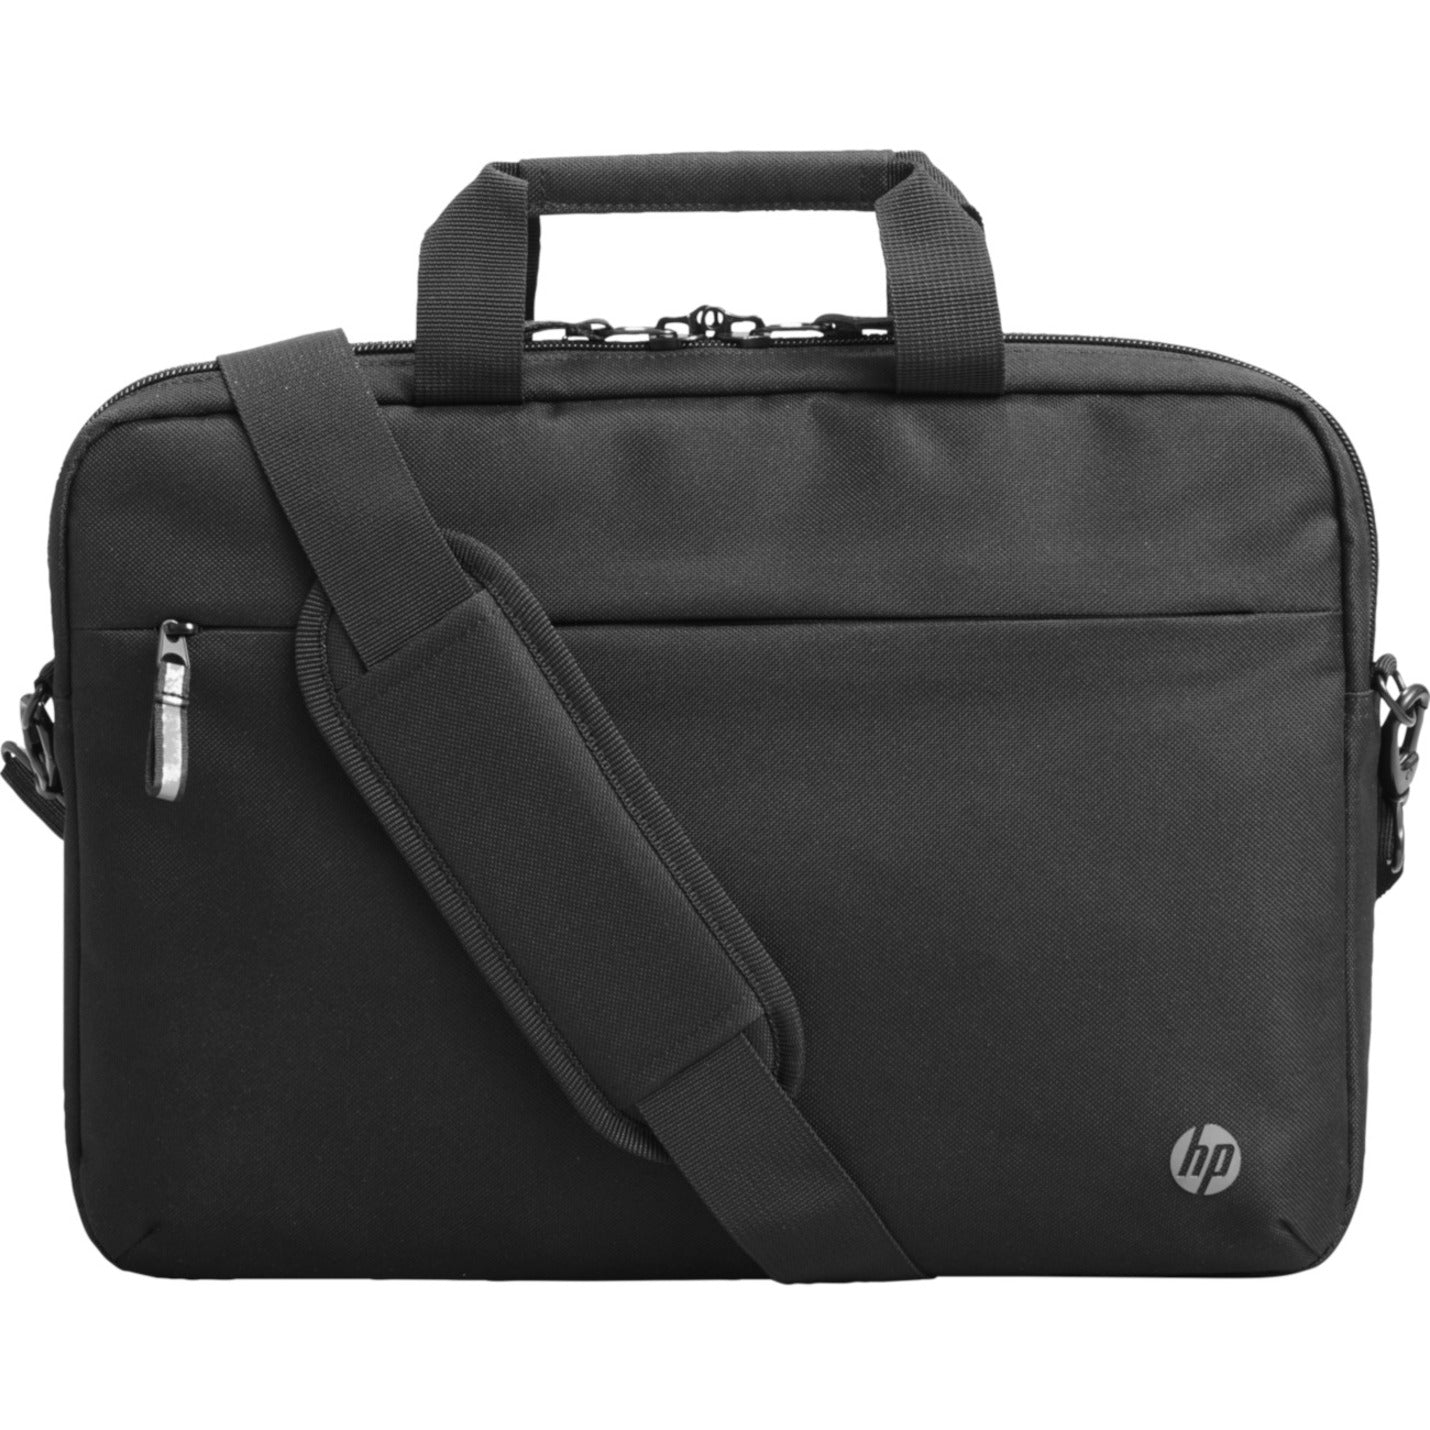 HP 3E5F9AA Renew Business 14.1 Laptop Bag, Recycled, 100% Plastic, Lightweight Carrying Case